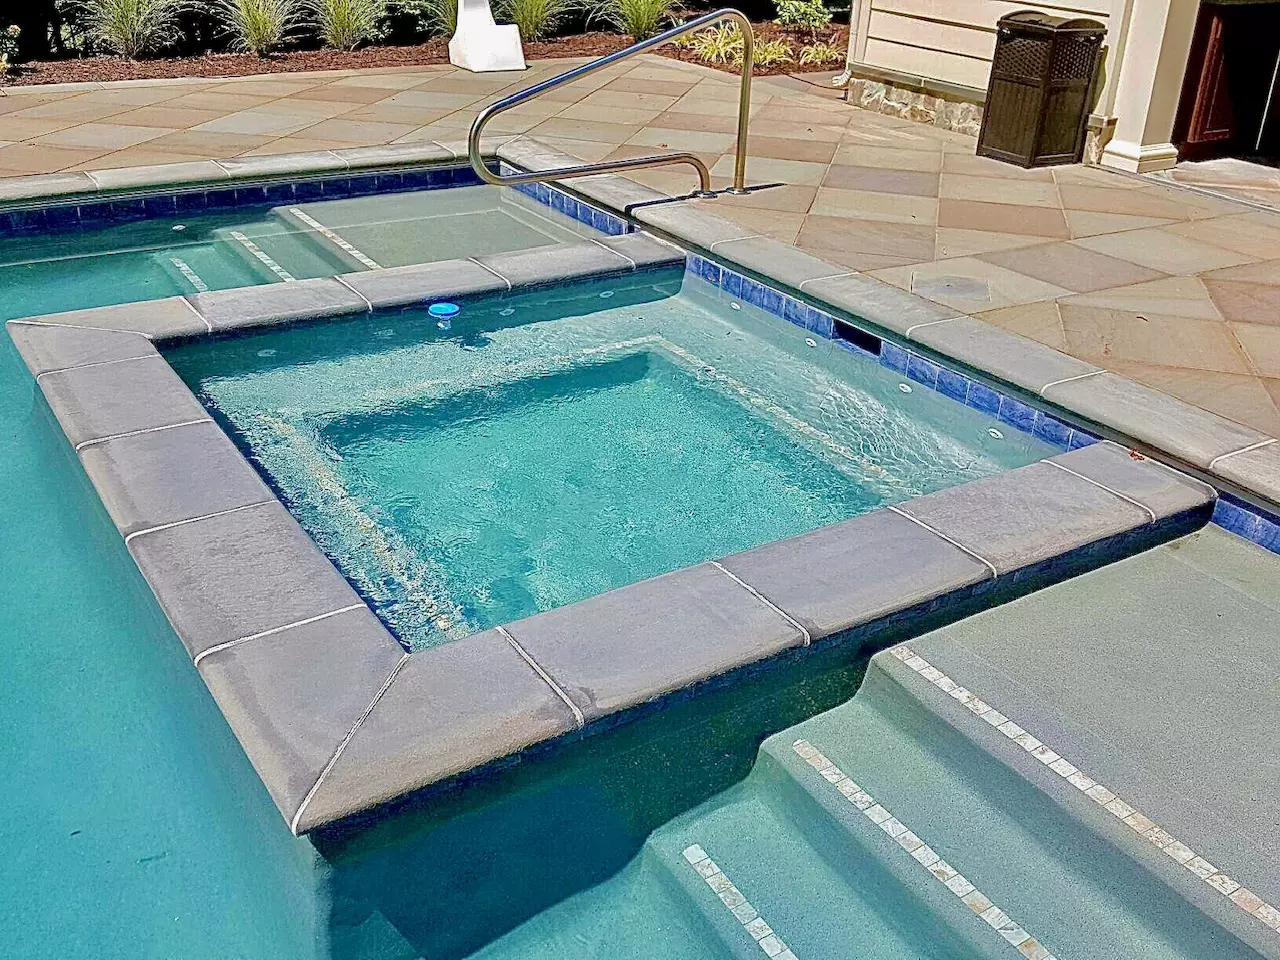 Jacuzzi Within a Swimming Pool